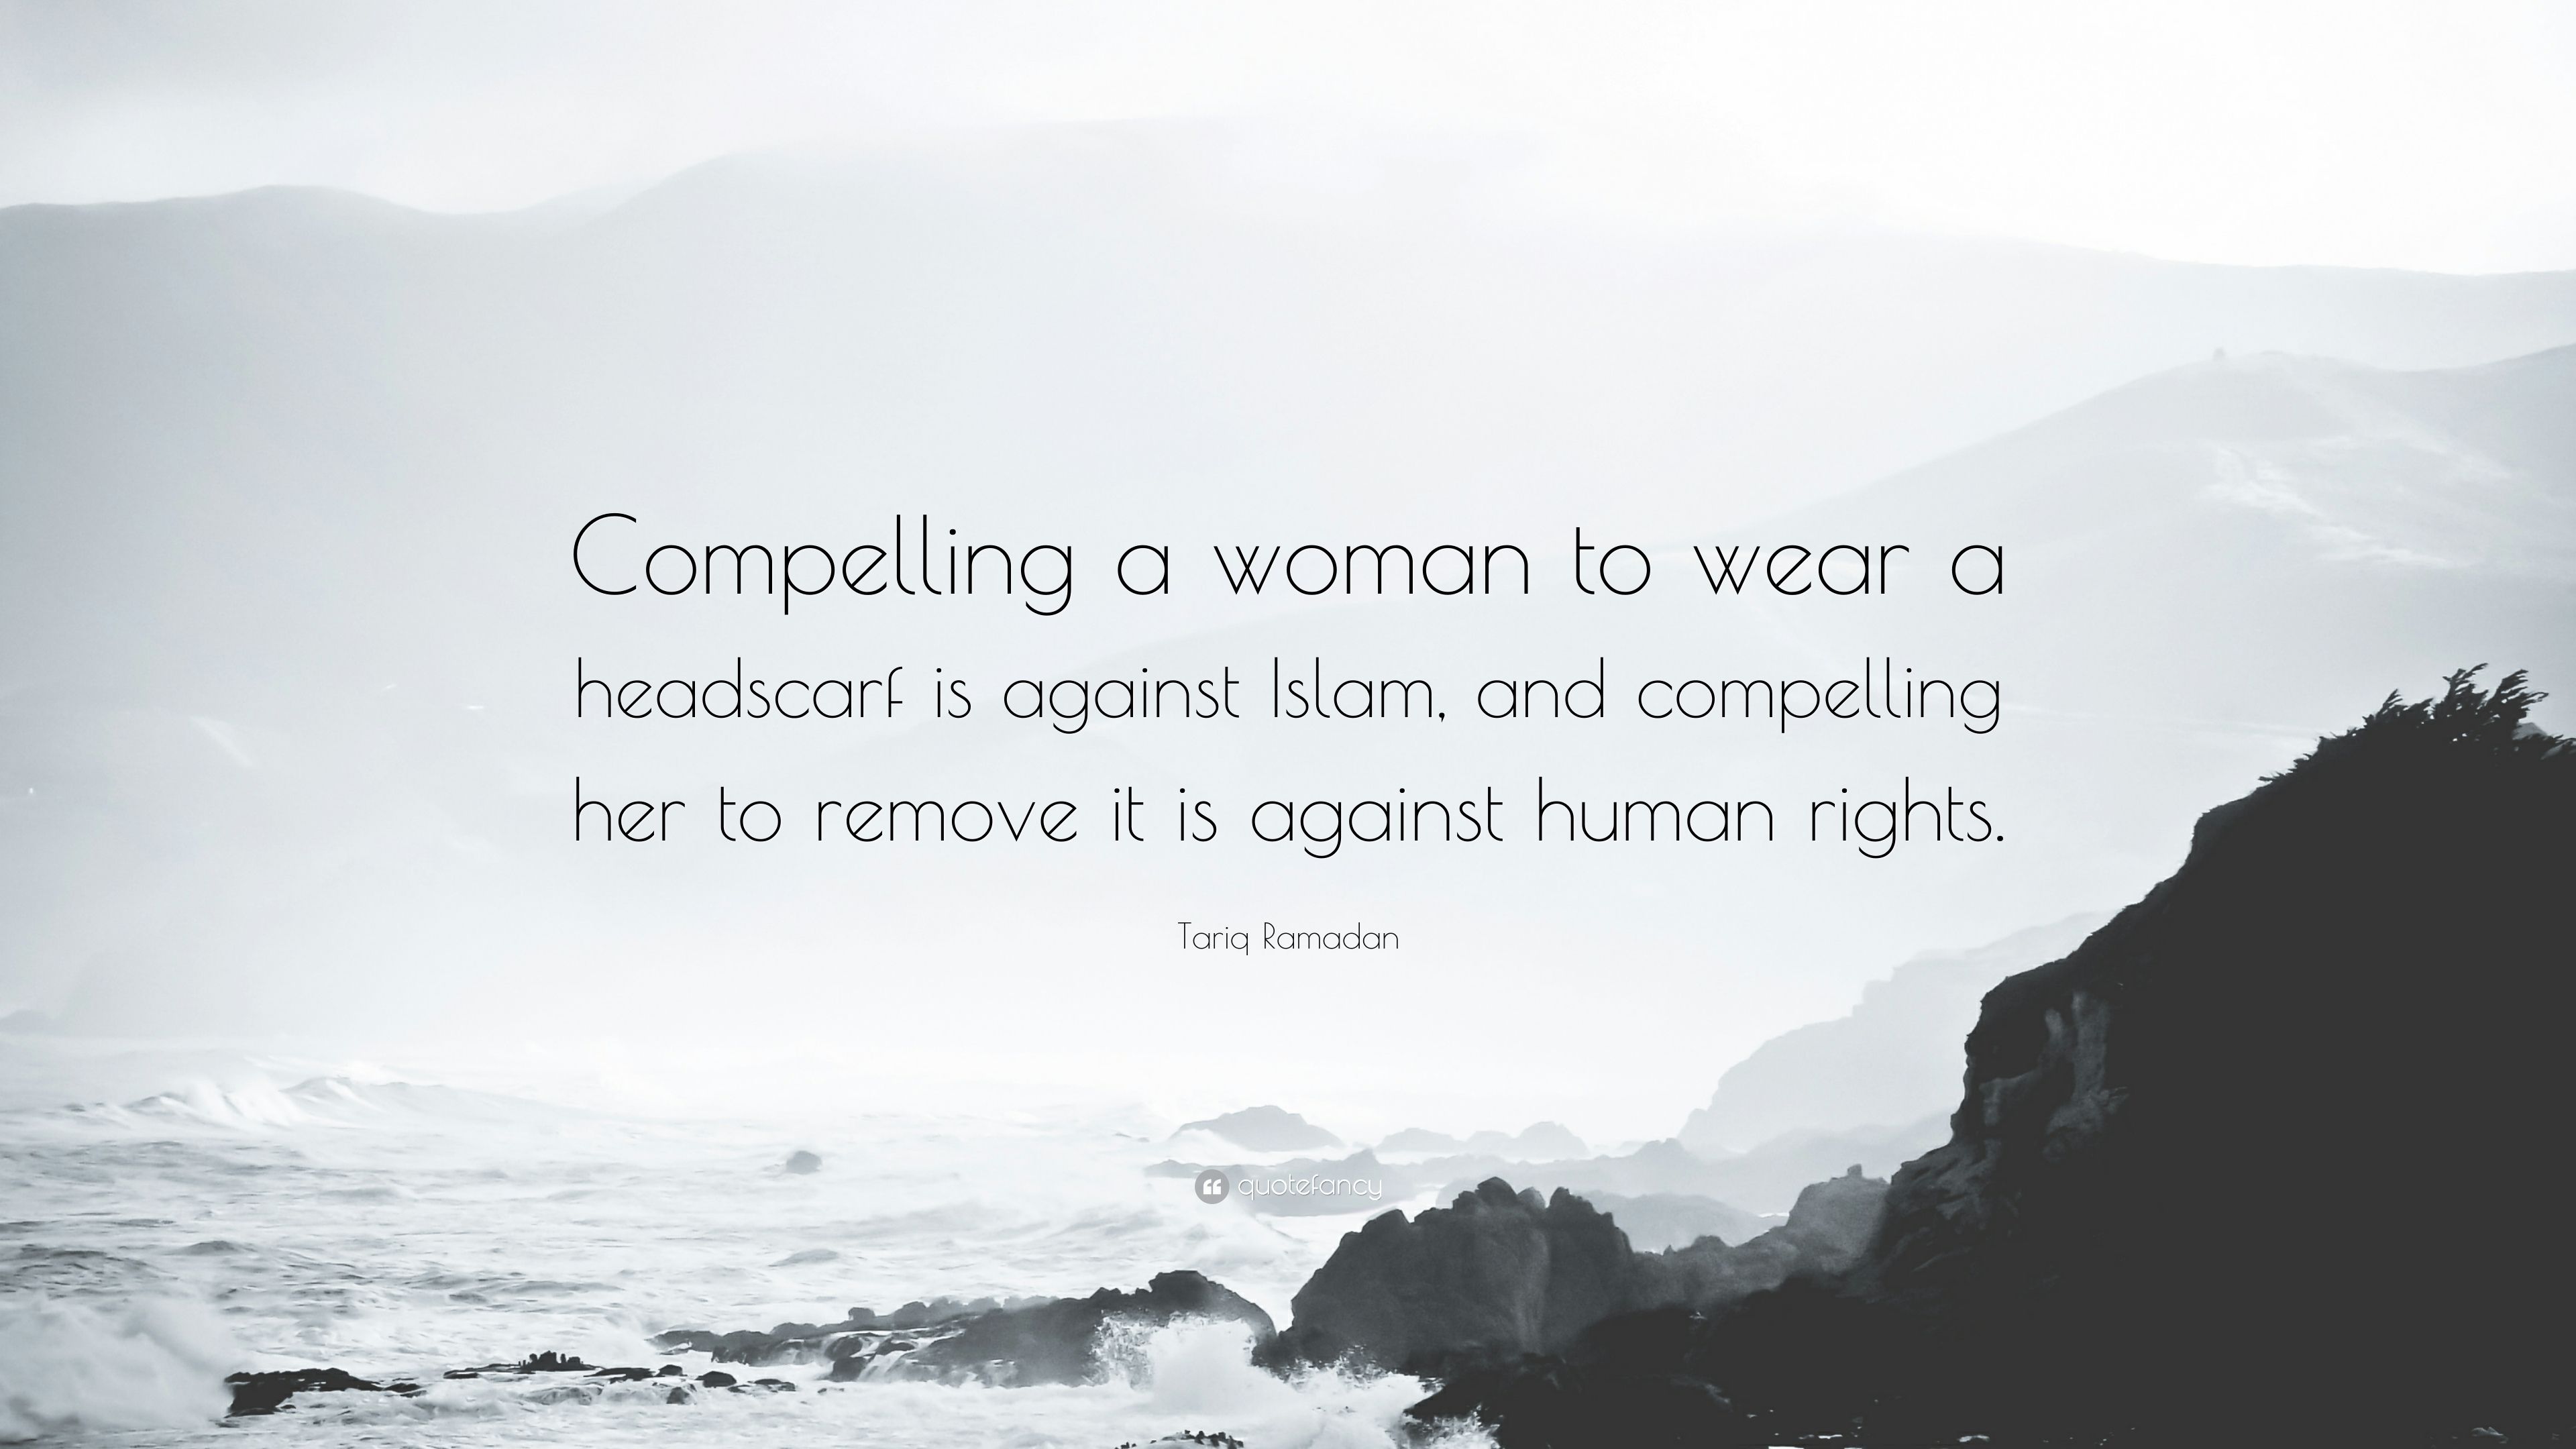 Tariq Ramadan Quote: “Compelling a woman to wear a headscarf is